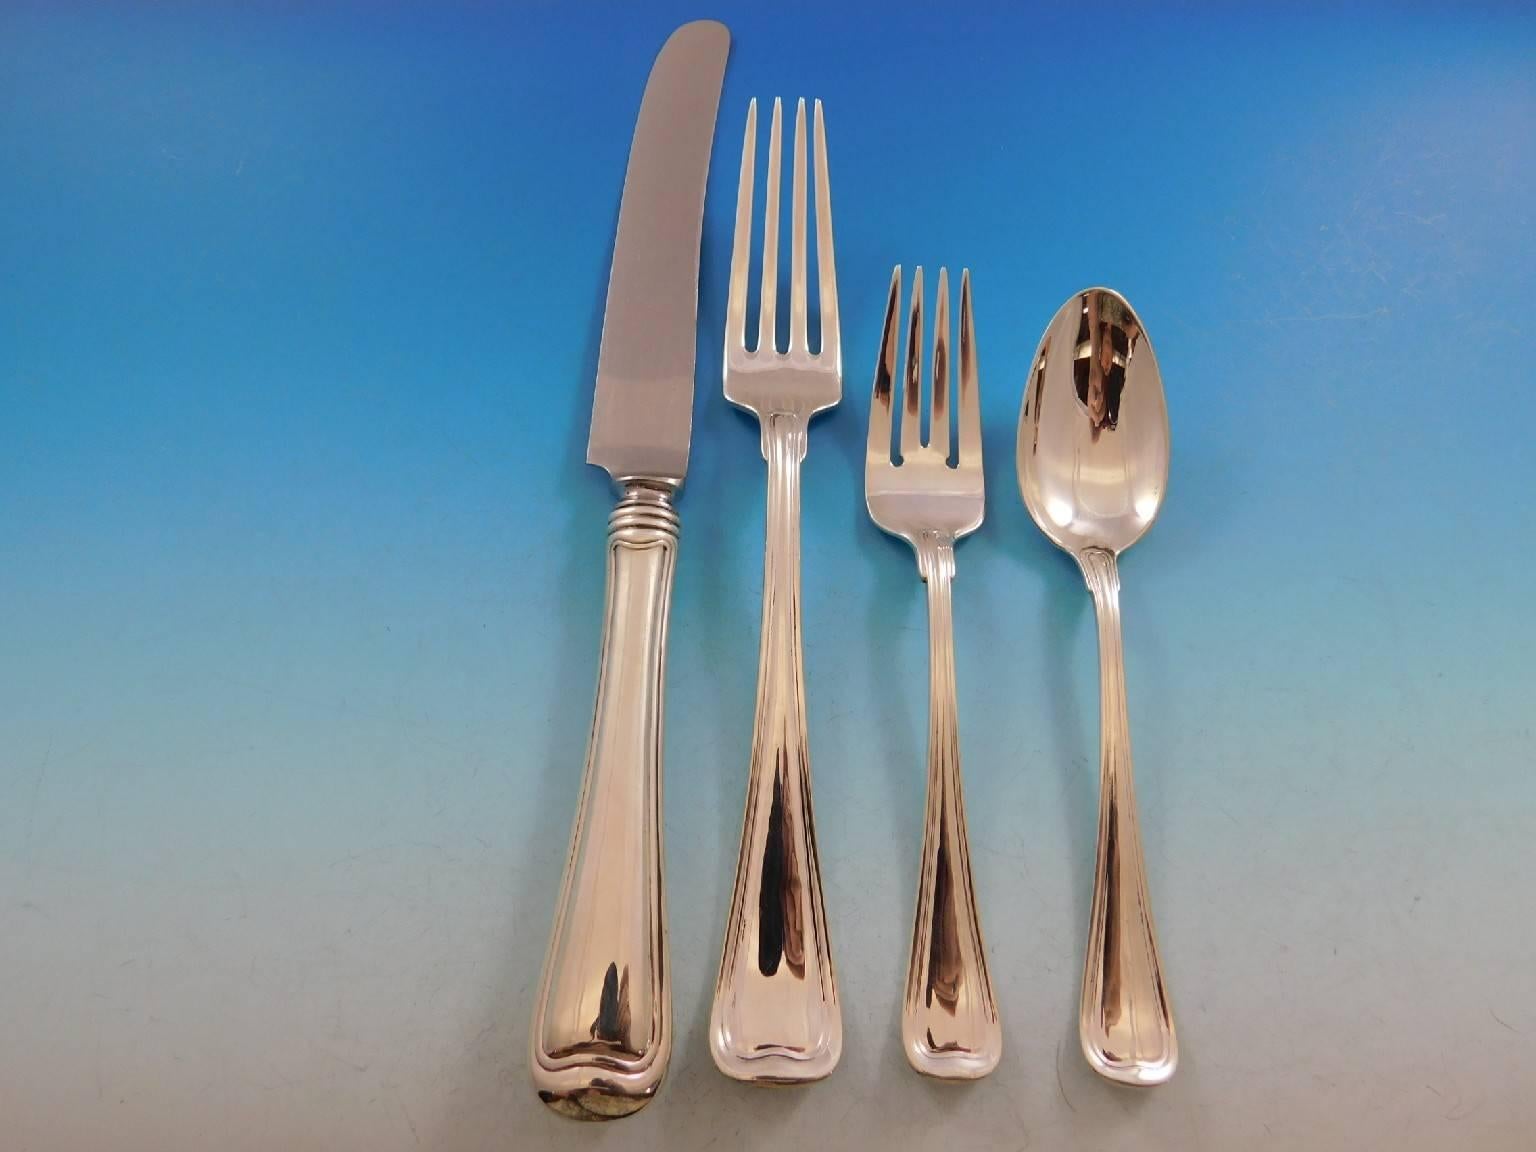 Outstanding old French by Gorham sterling silver dinner and luncheon flatware set of 116 pieces. This set includes:

Eight dinner size knives, 9 3/4